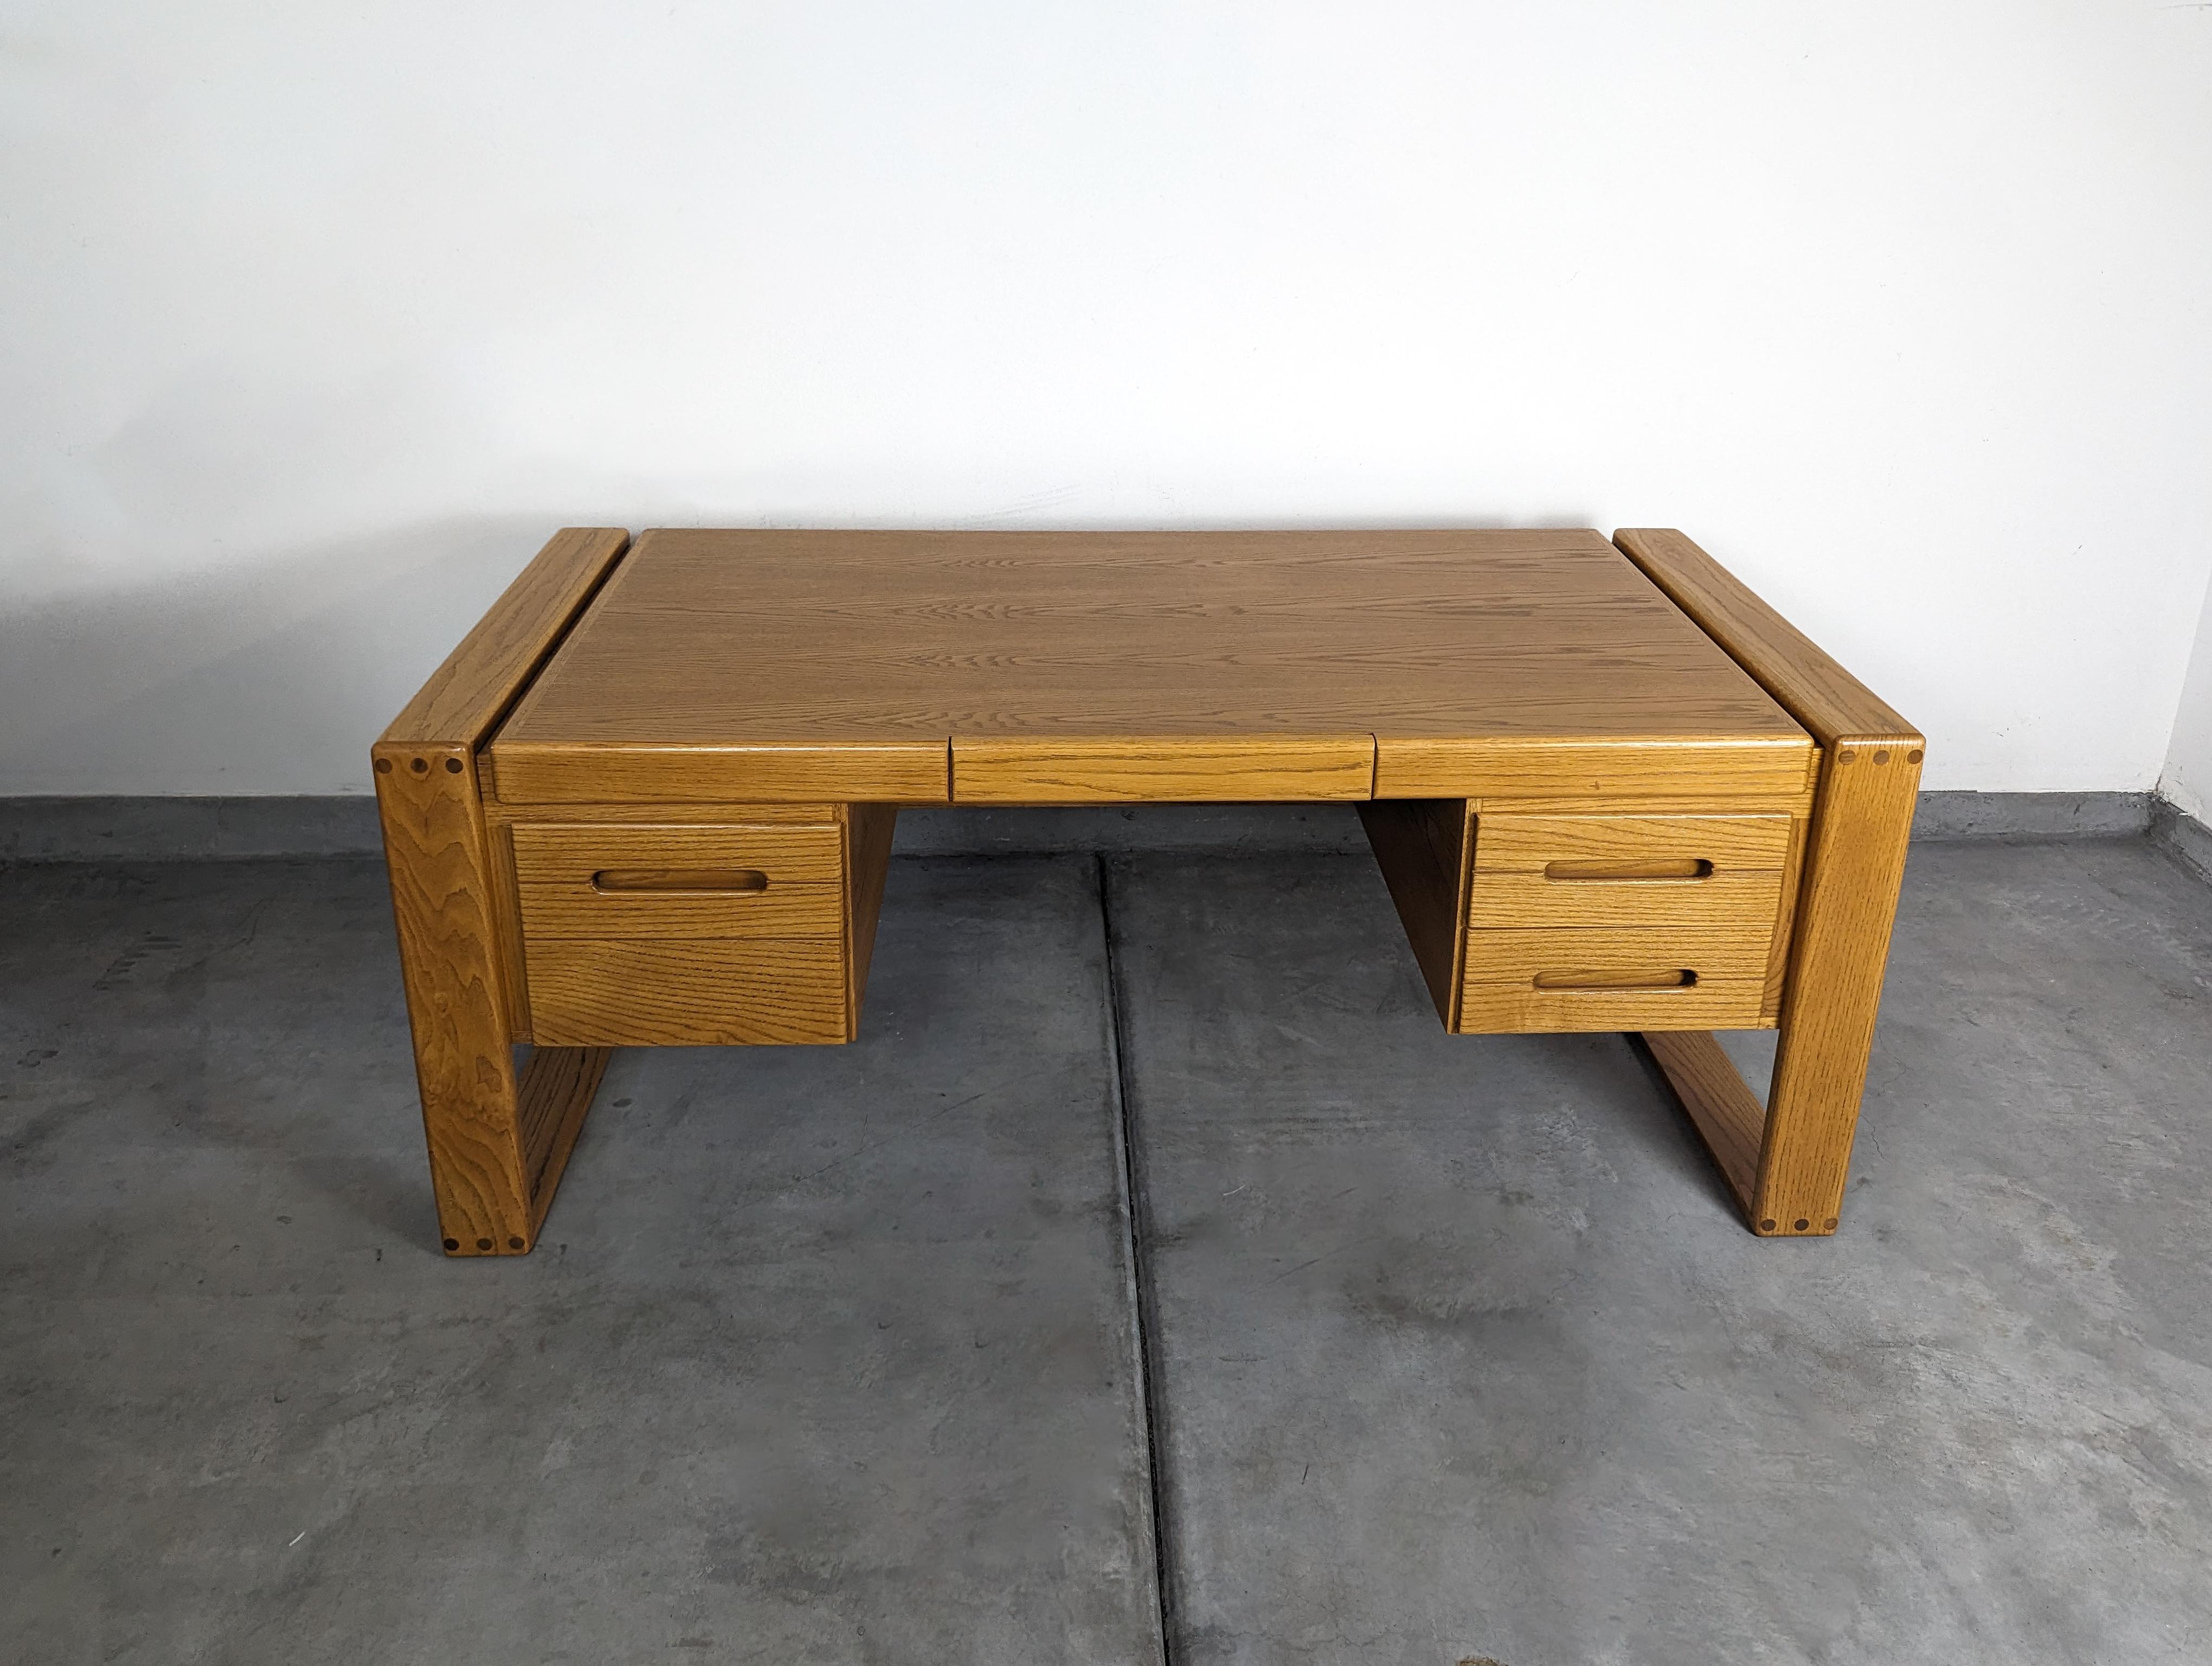 American Refinished Lou Hodges Handcrafted Oak Desk for California Design Group, c1980s For Sale